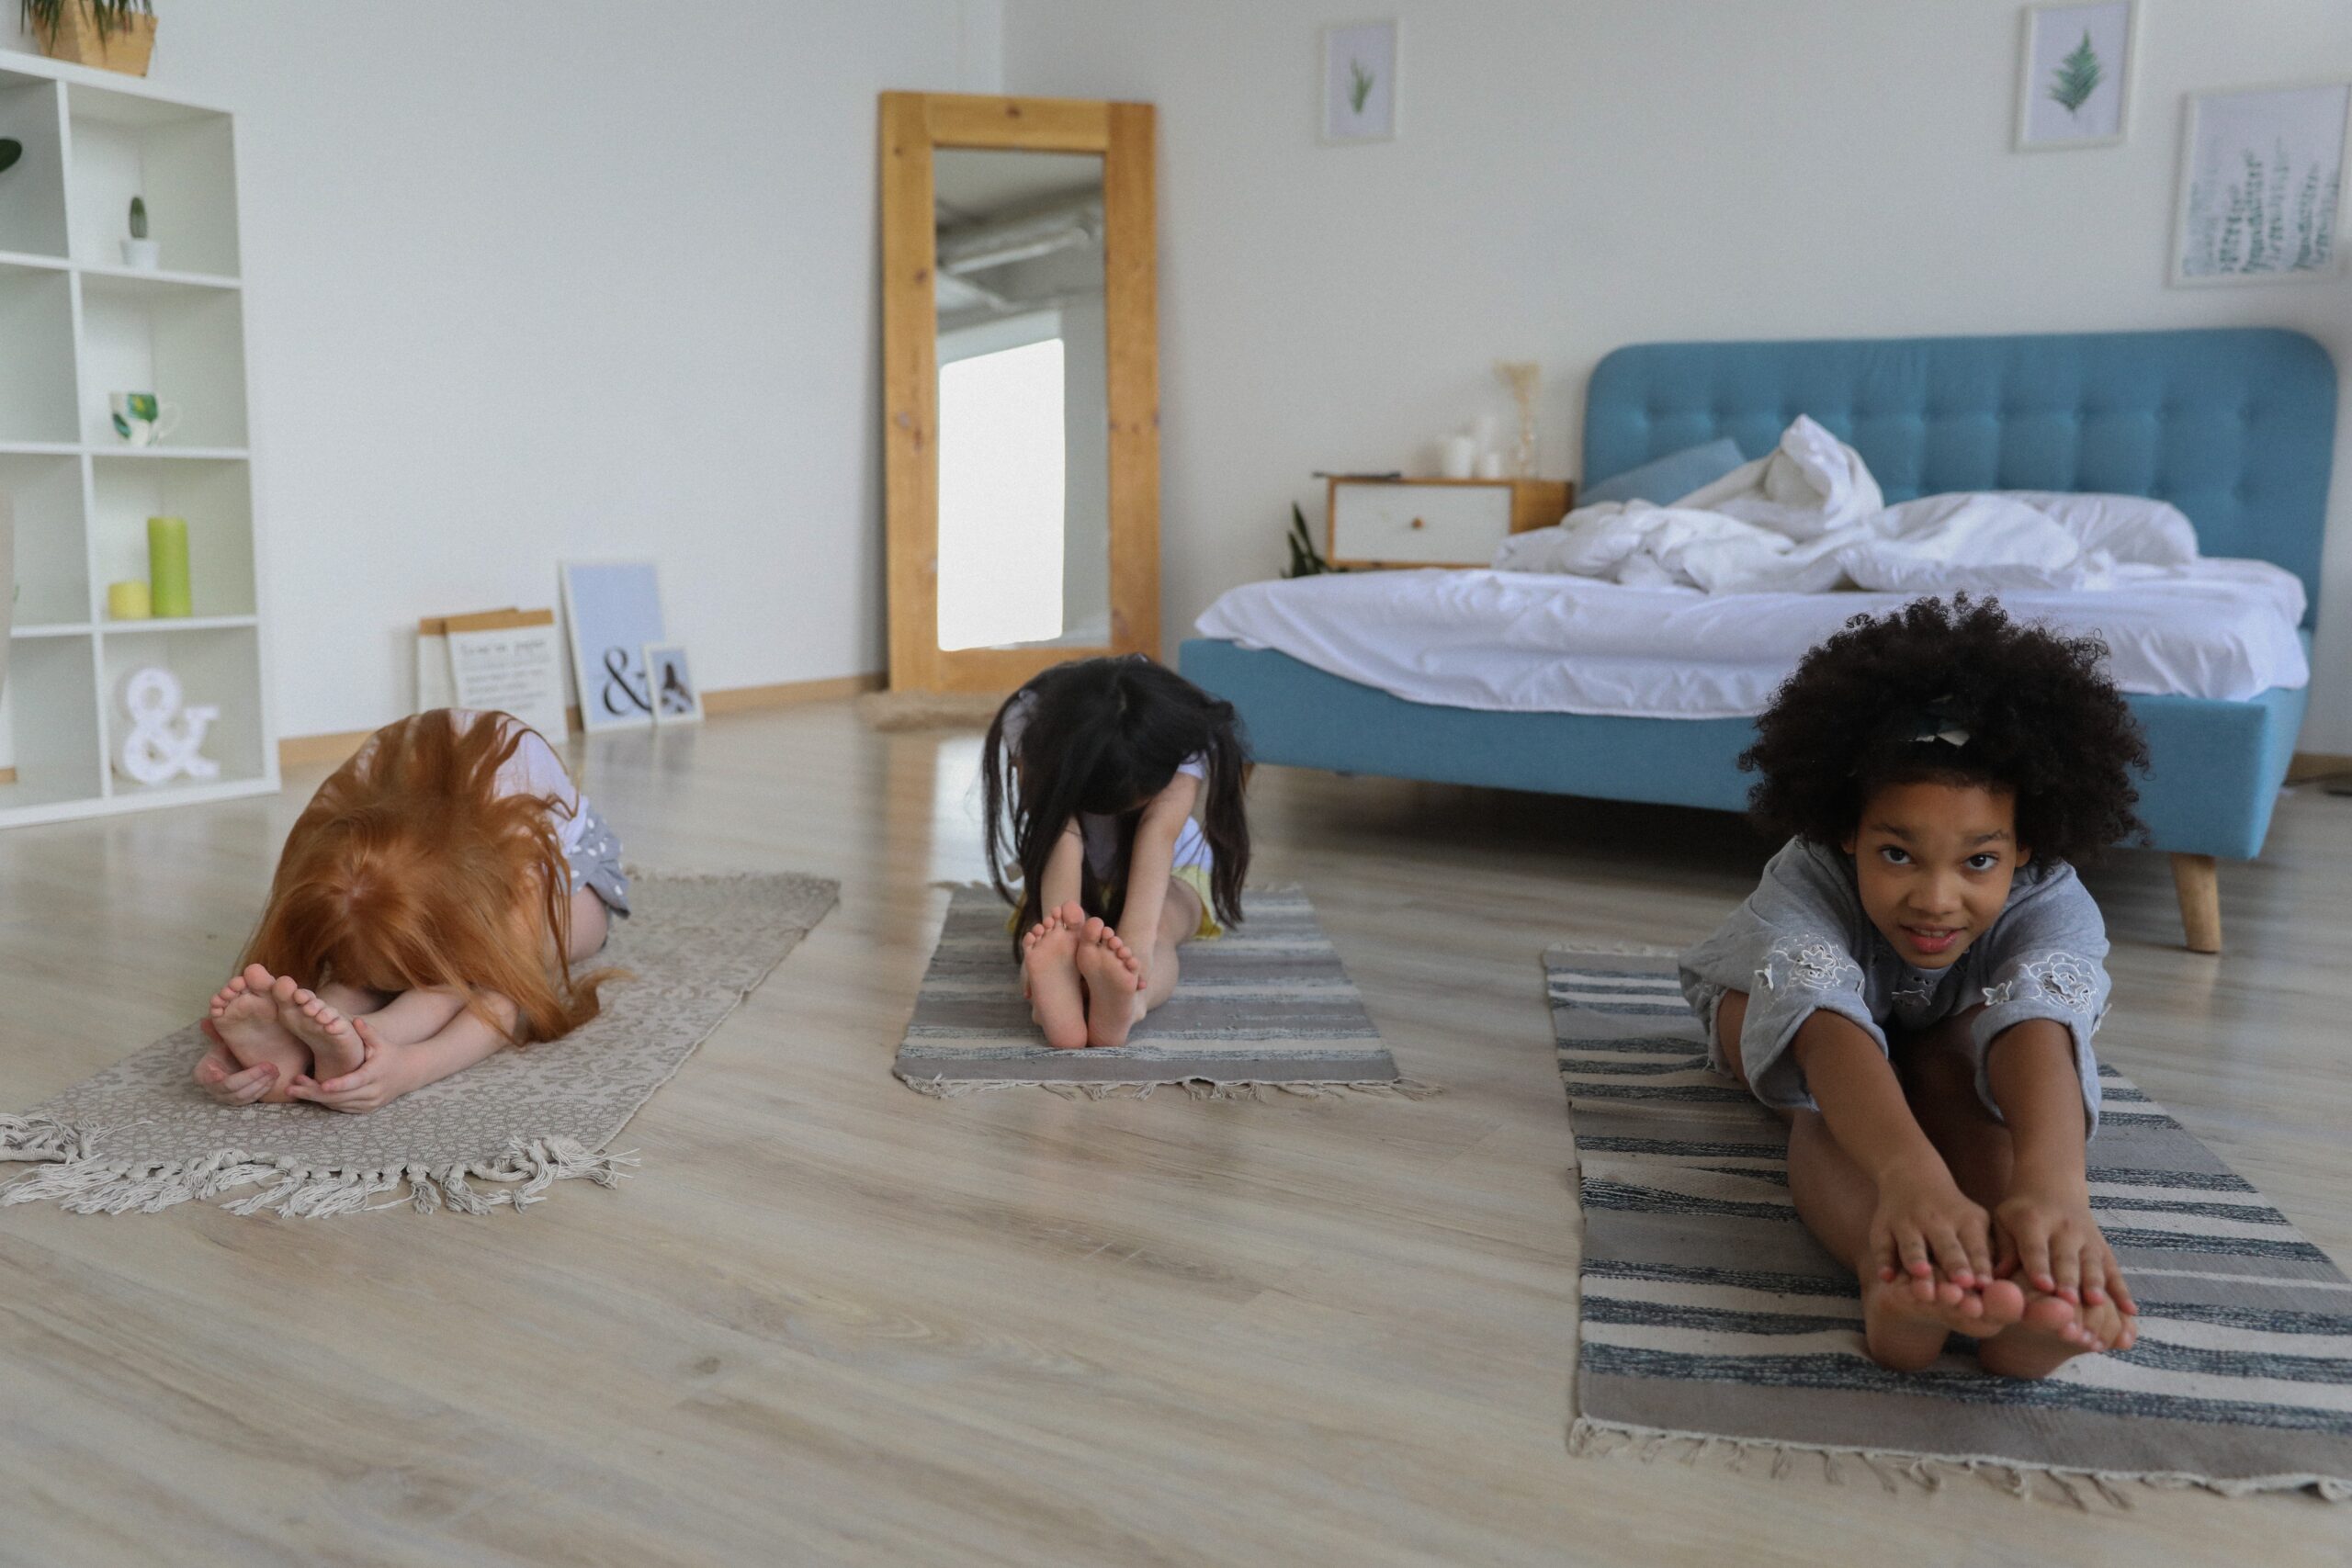 Three girls stretching on a floor in a bedroom.